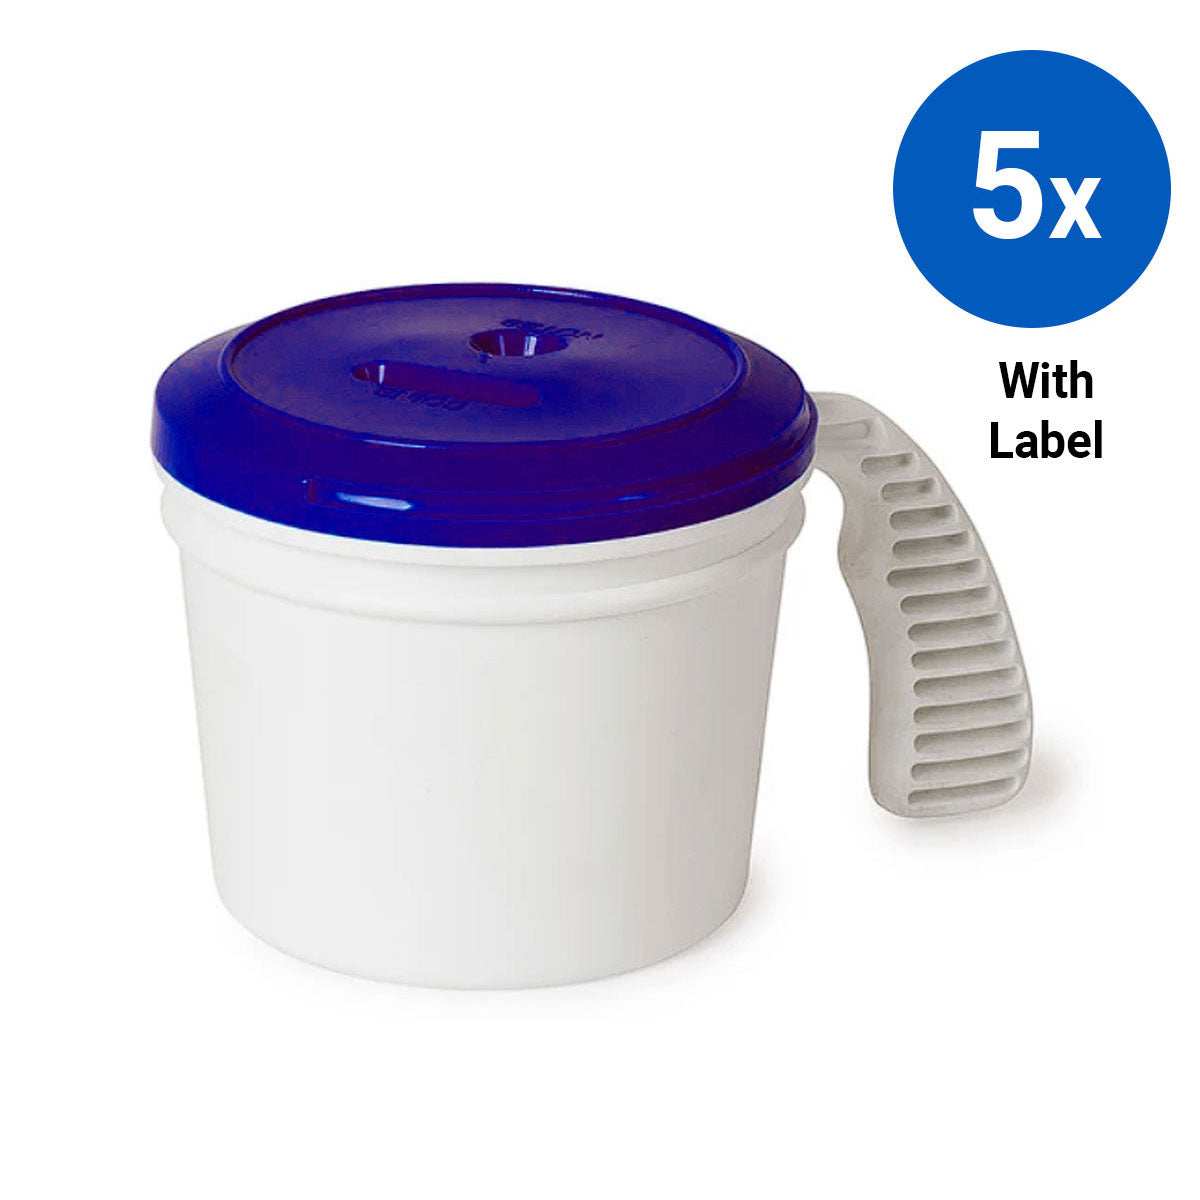 5x Collection Container Base and Standard Lid with Labels - Purple